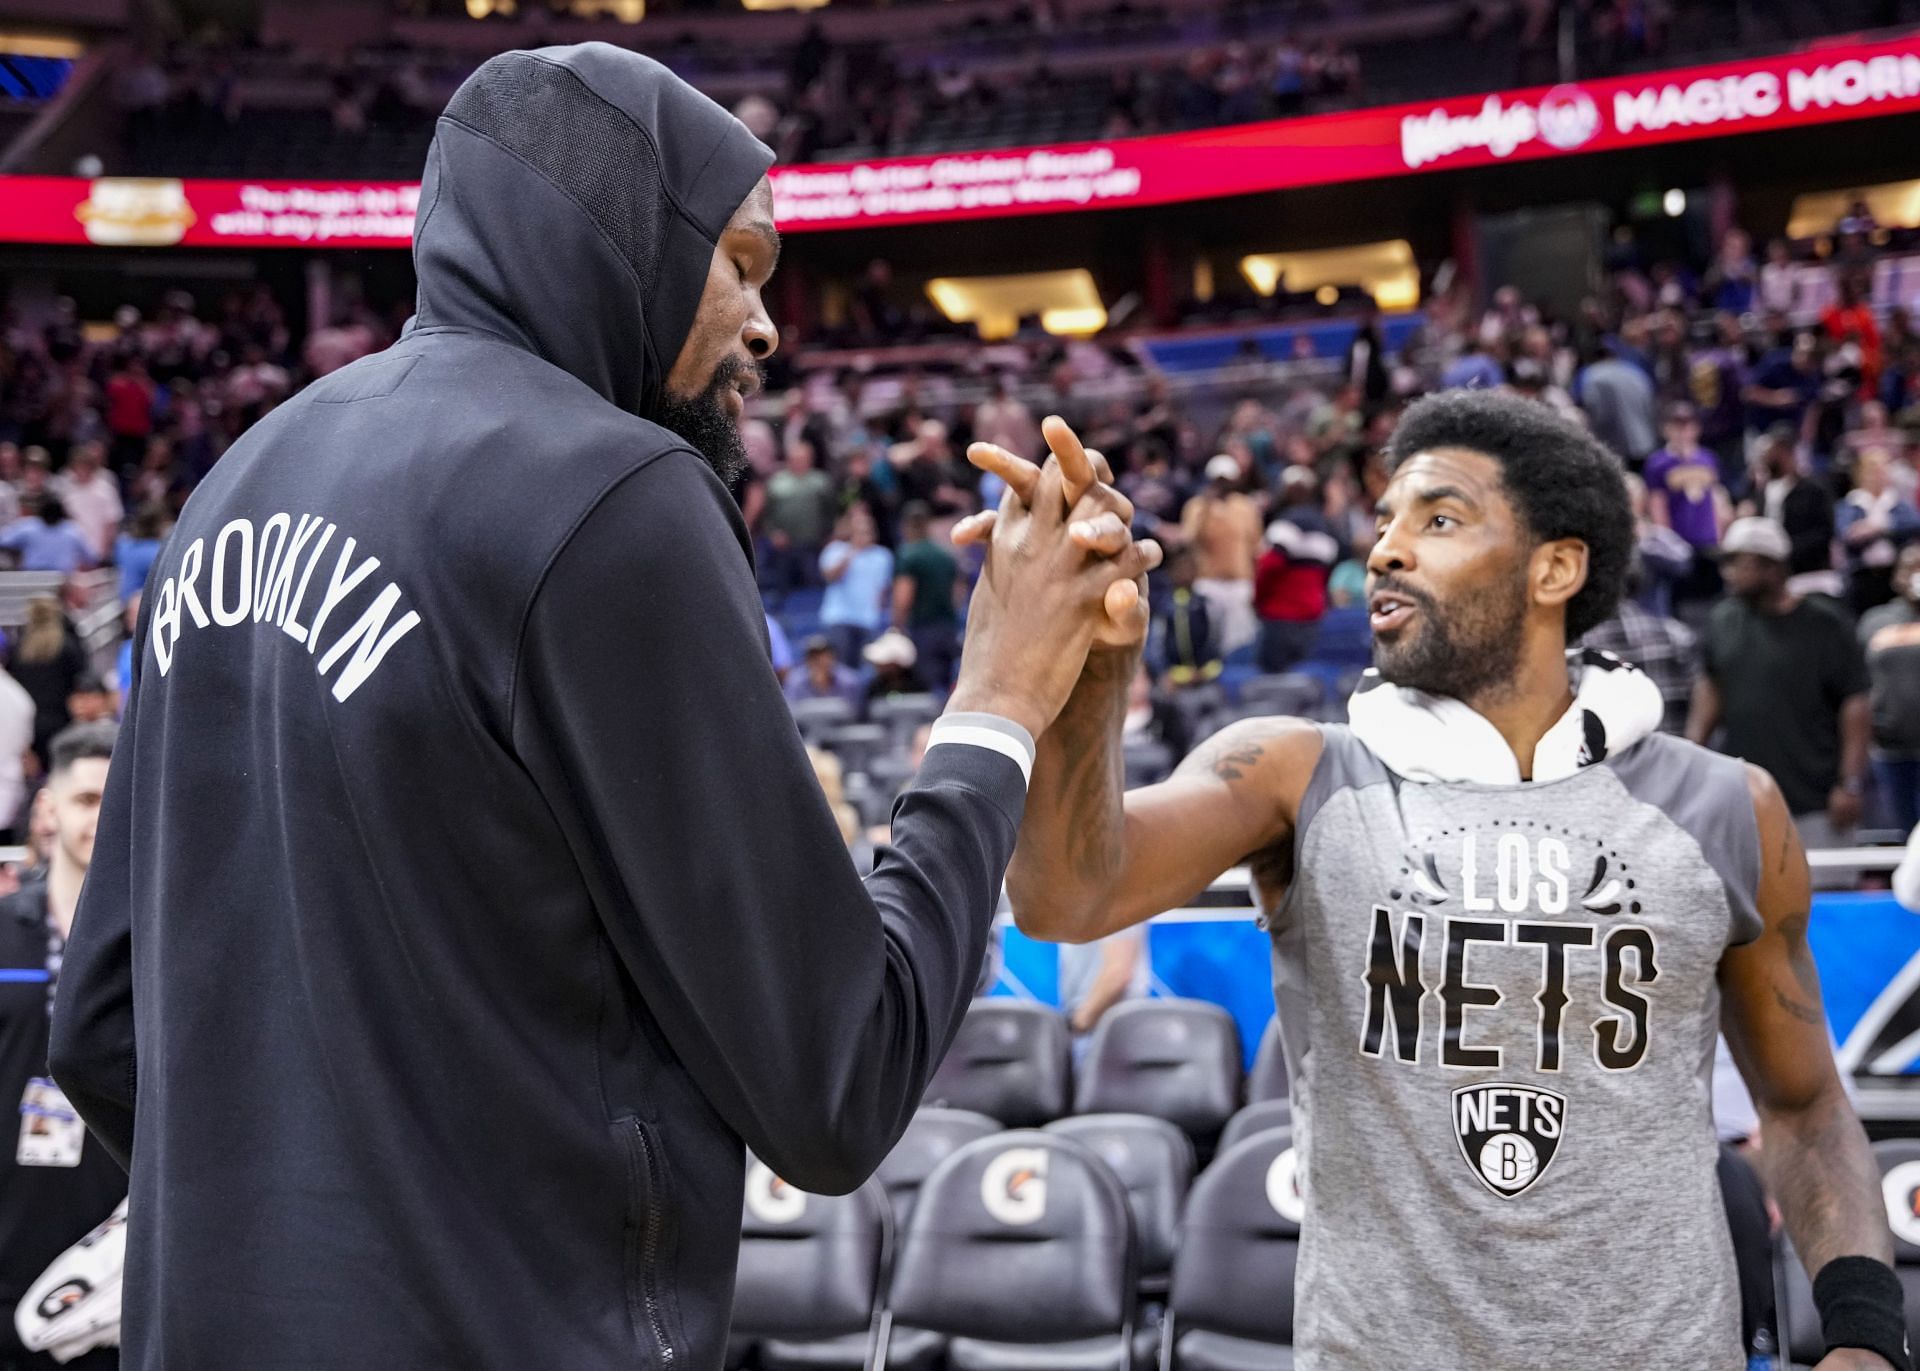 Kyrie Irving #11 of the Brooklyn Nets celebrates with Kevin Durant #7 after scoring a career high and franchise record 60 points in beating the Orlando Magic by score of 150-108 at Amway Center on March 15, 2022 in Orlando, Florida.